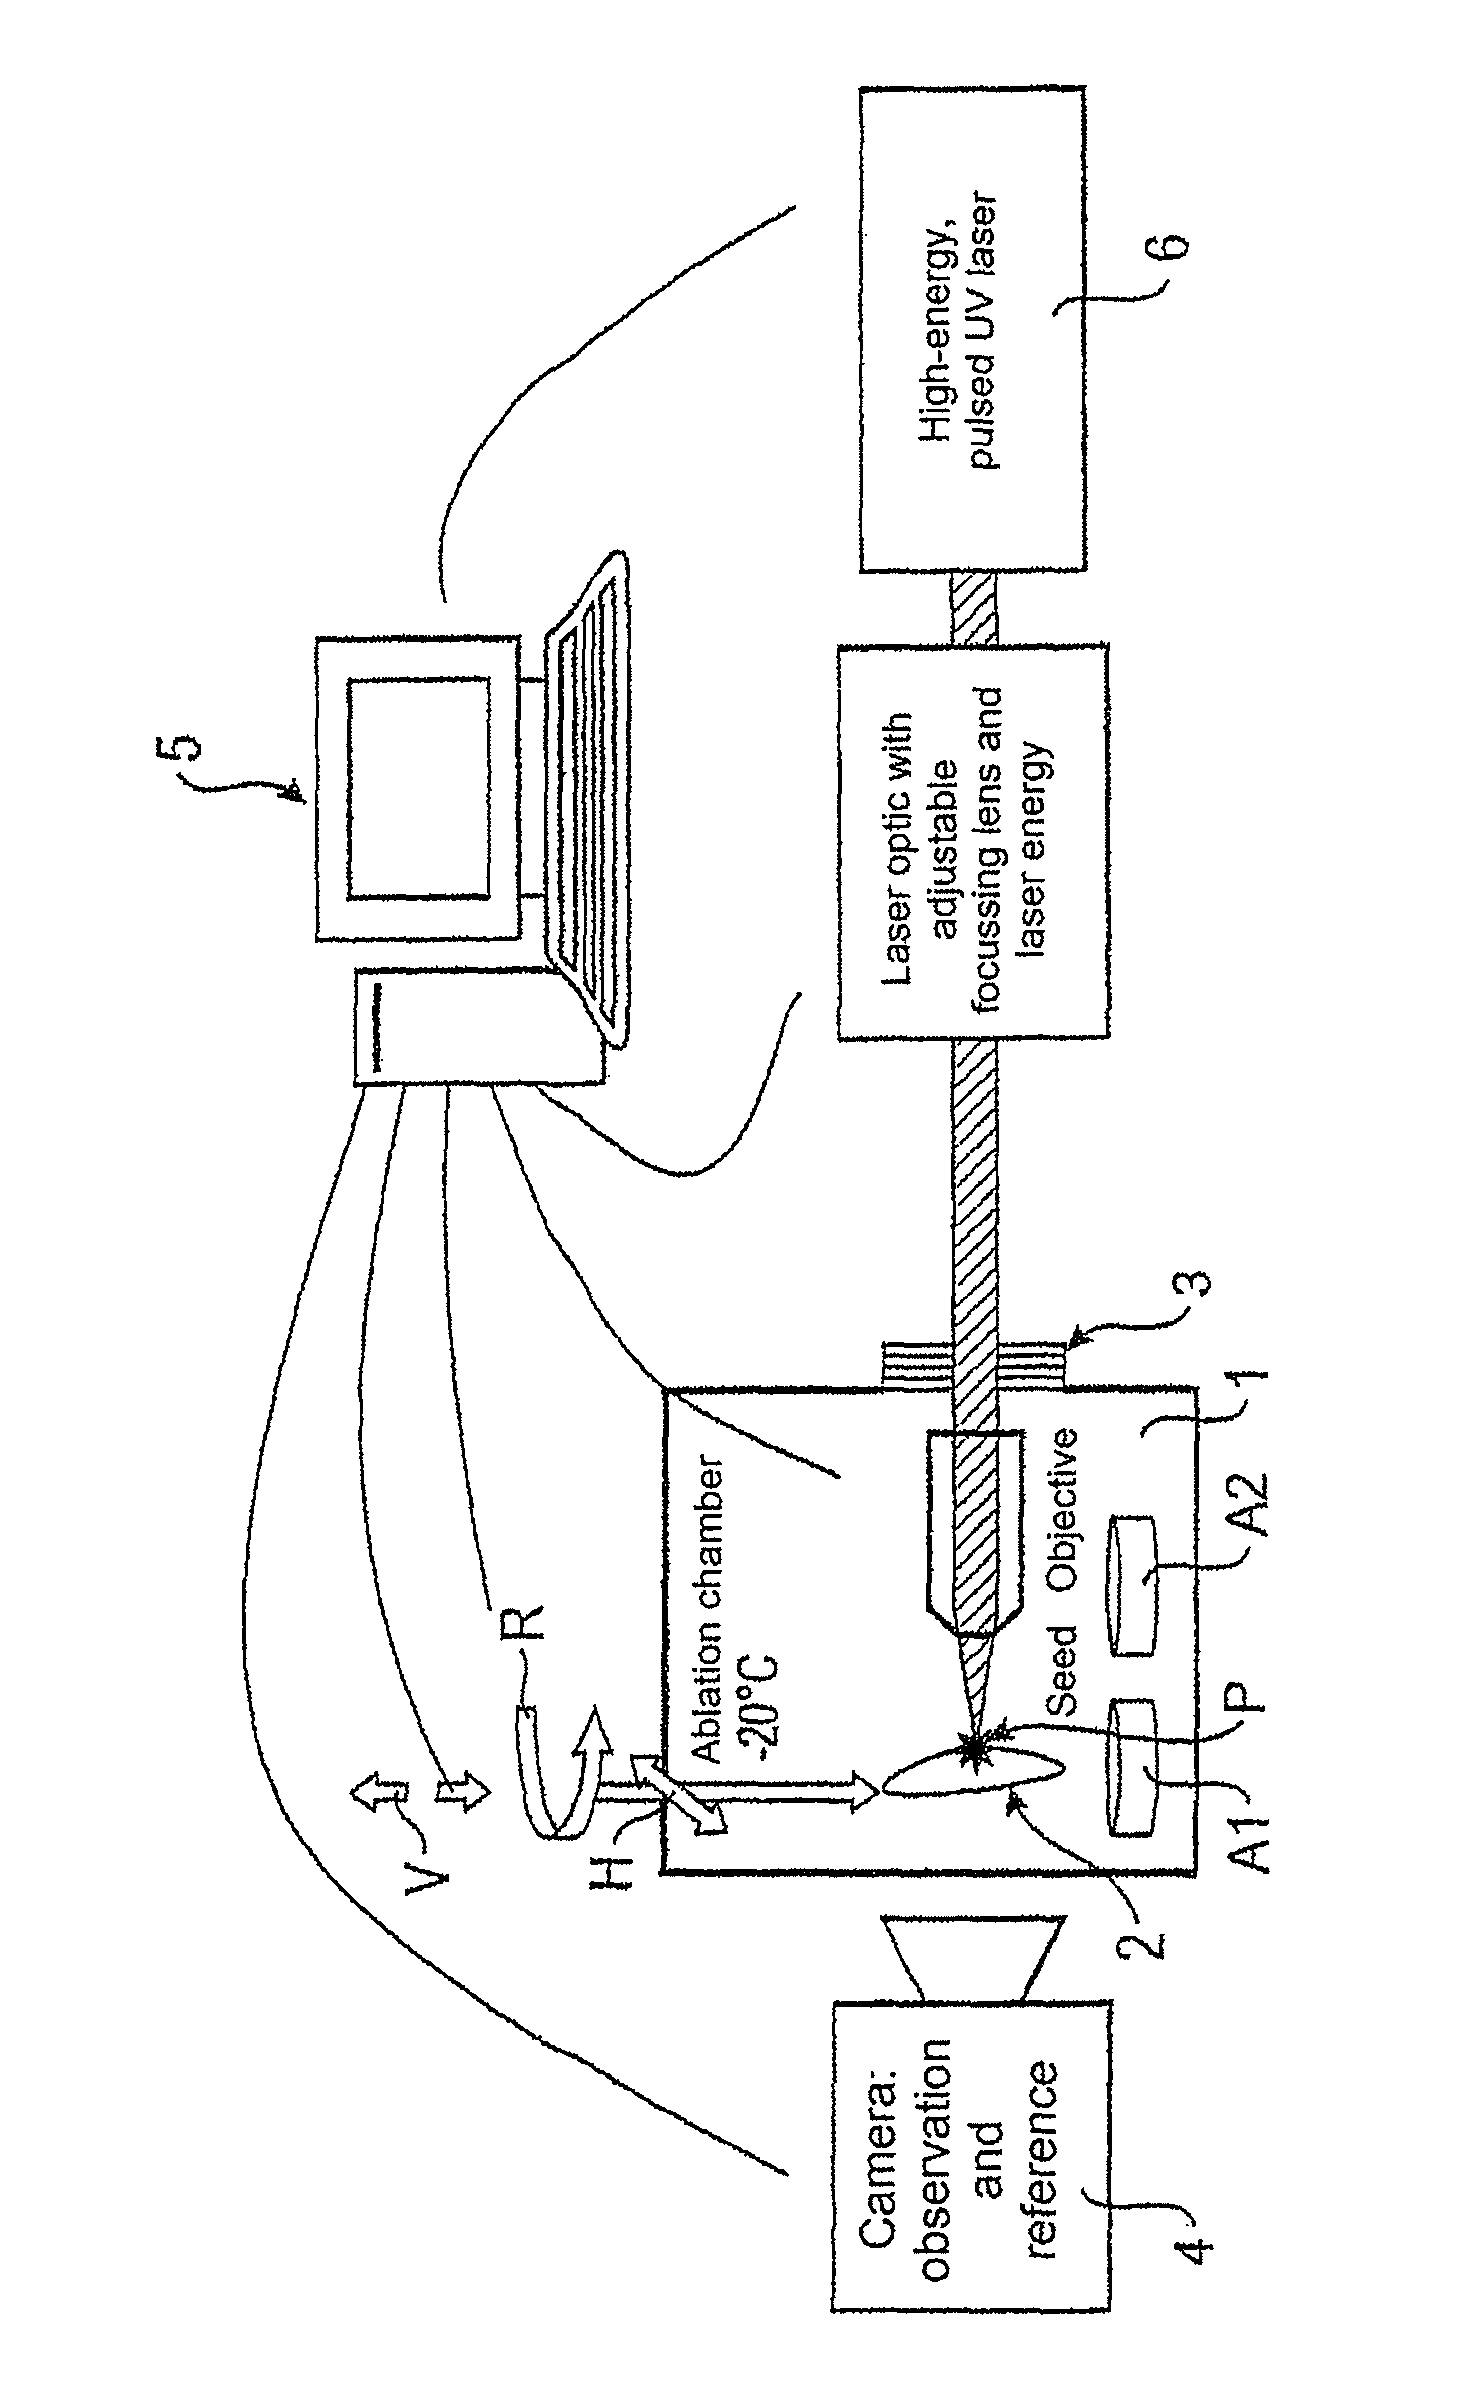 Method and device for three dimensional microdissection